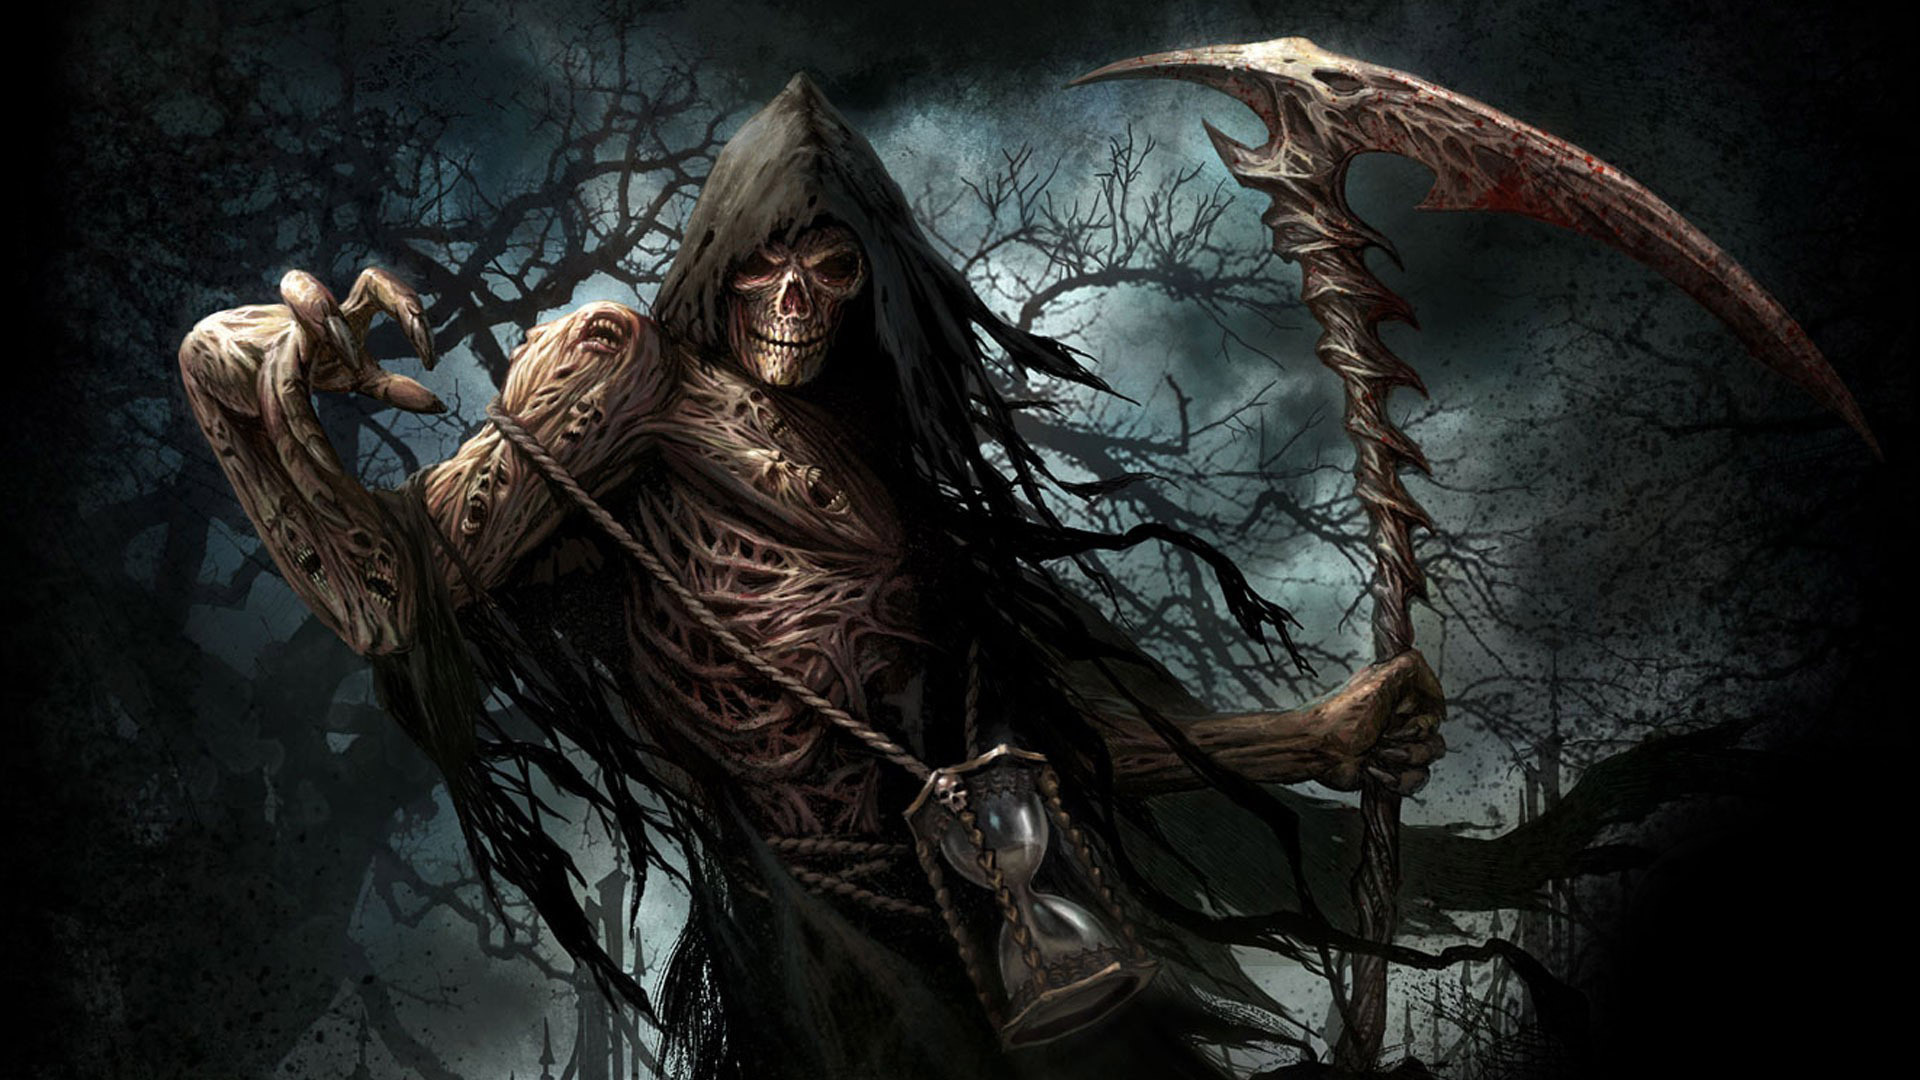 High Quality Pictures Of Grim Reaper Wallpaper | Full HD Pictures